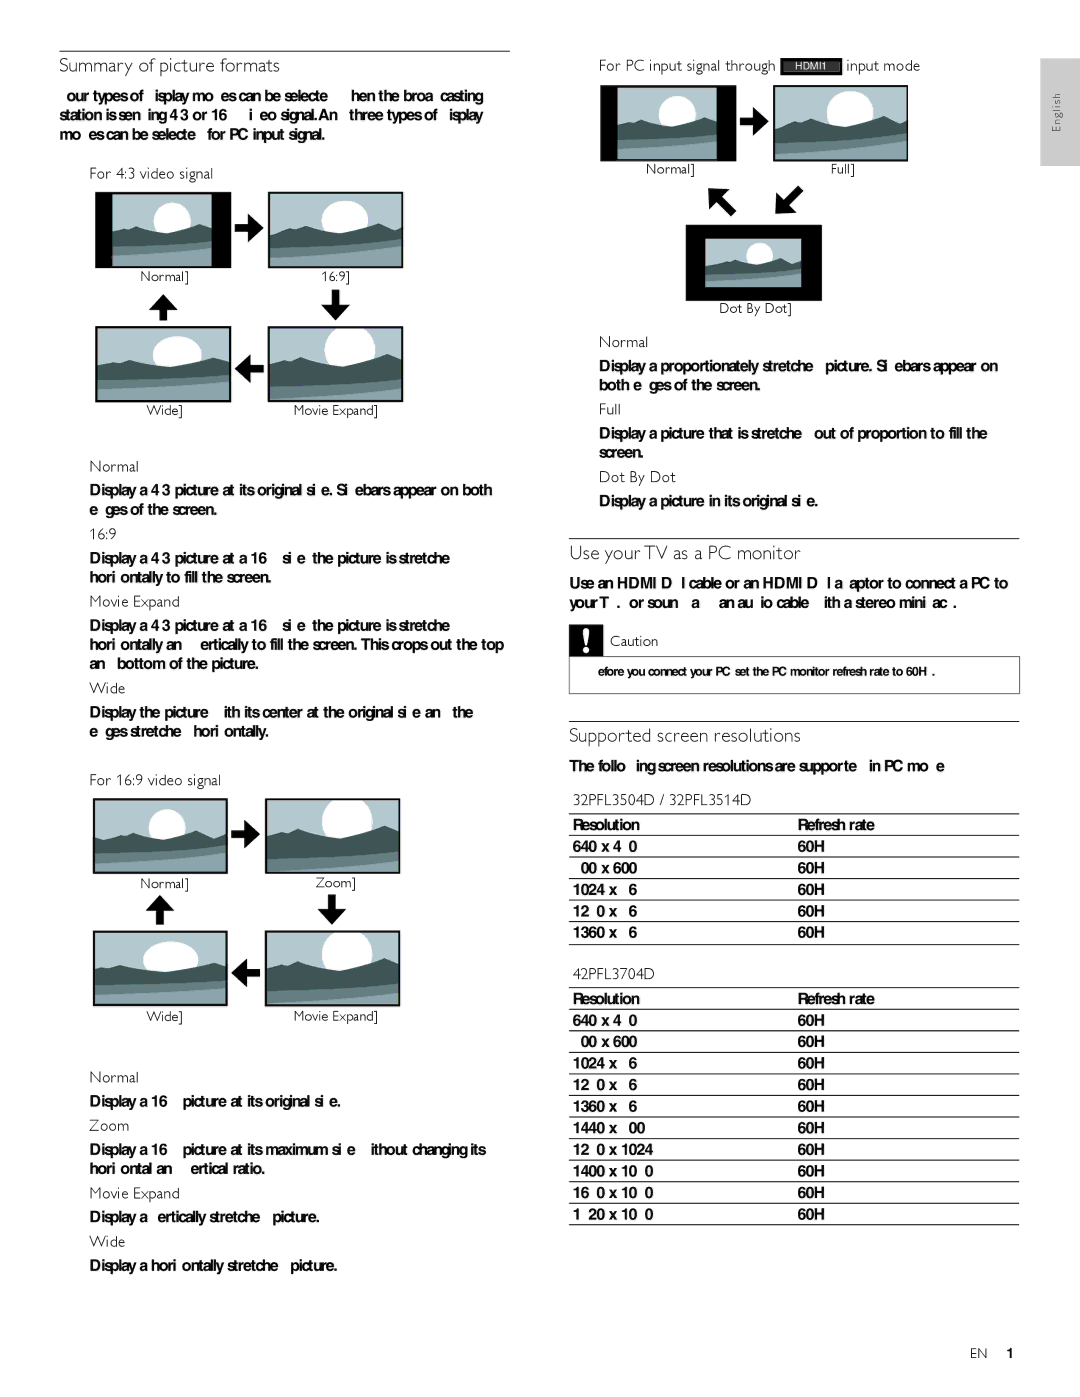 Philips 32PFL3514D user manual Summary of picture formats, Use your TV as a PC monitor, Supported screen resolutions 